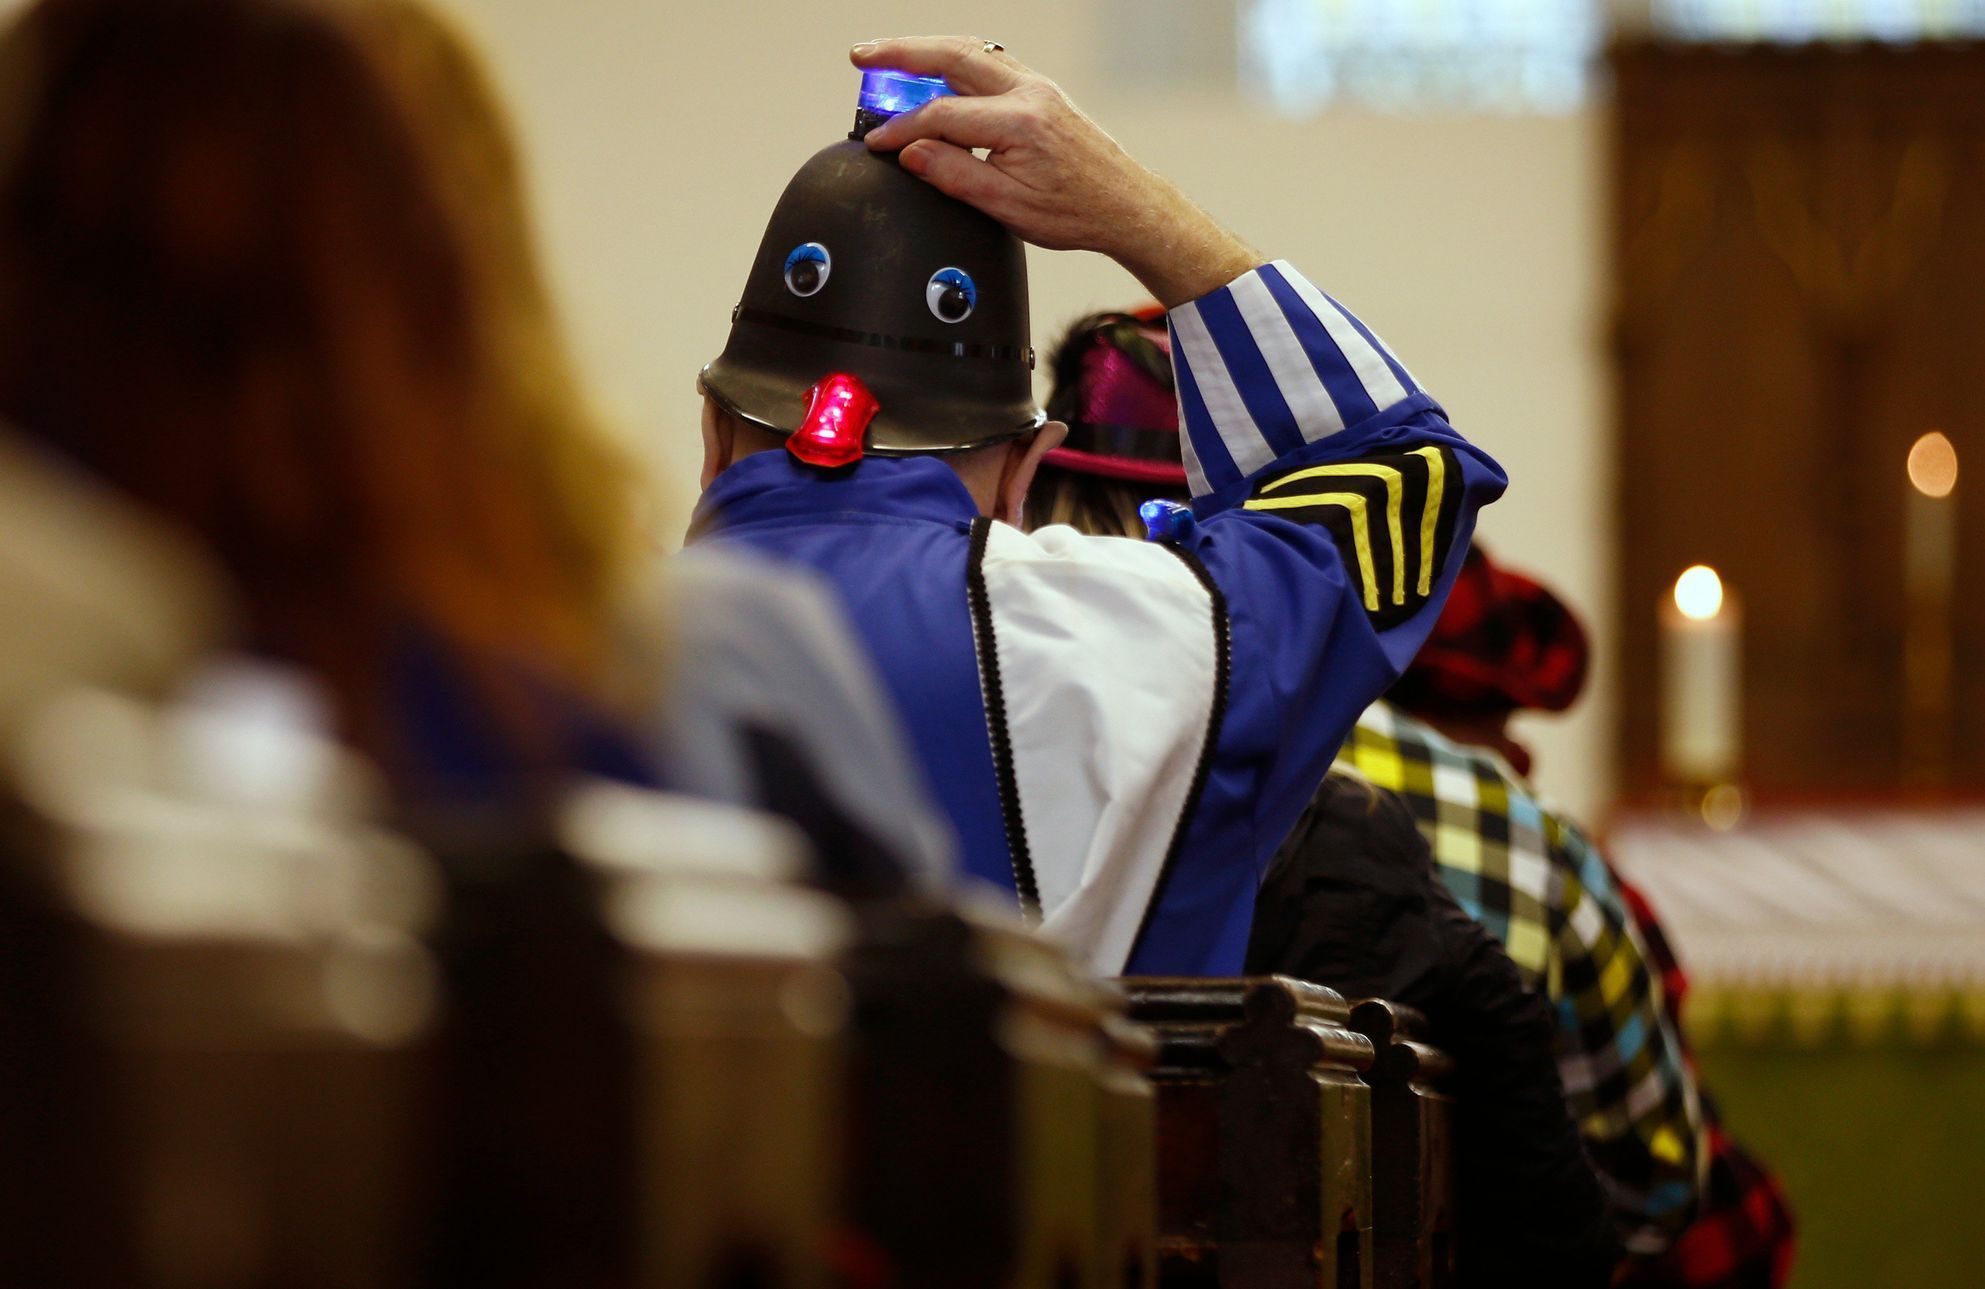 A clown sits in the pews of the All Saints Church during the Grimaldi clown service in Dalston, north London